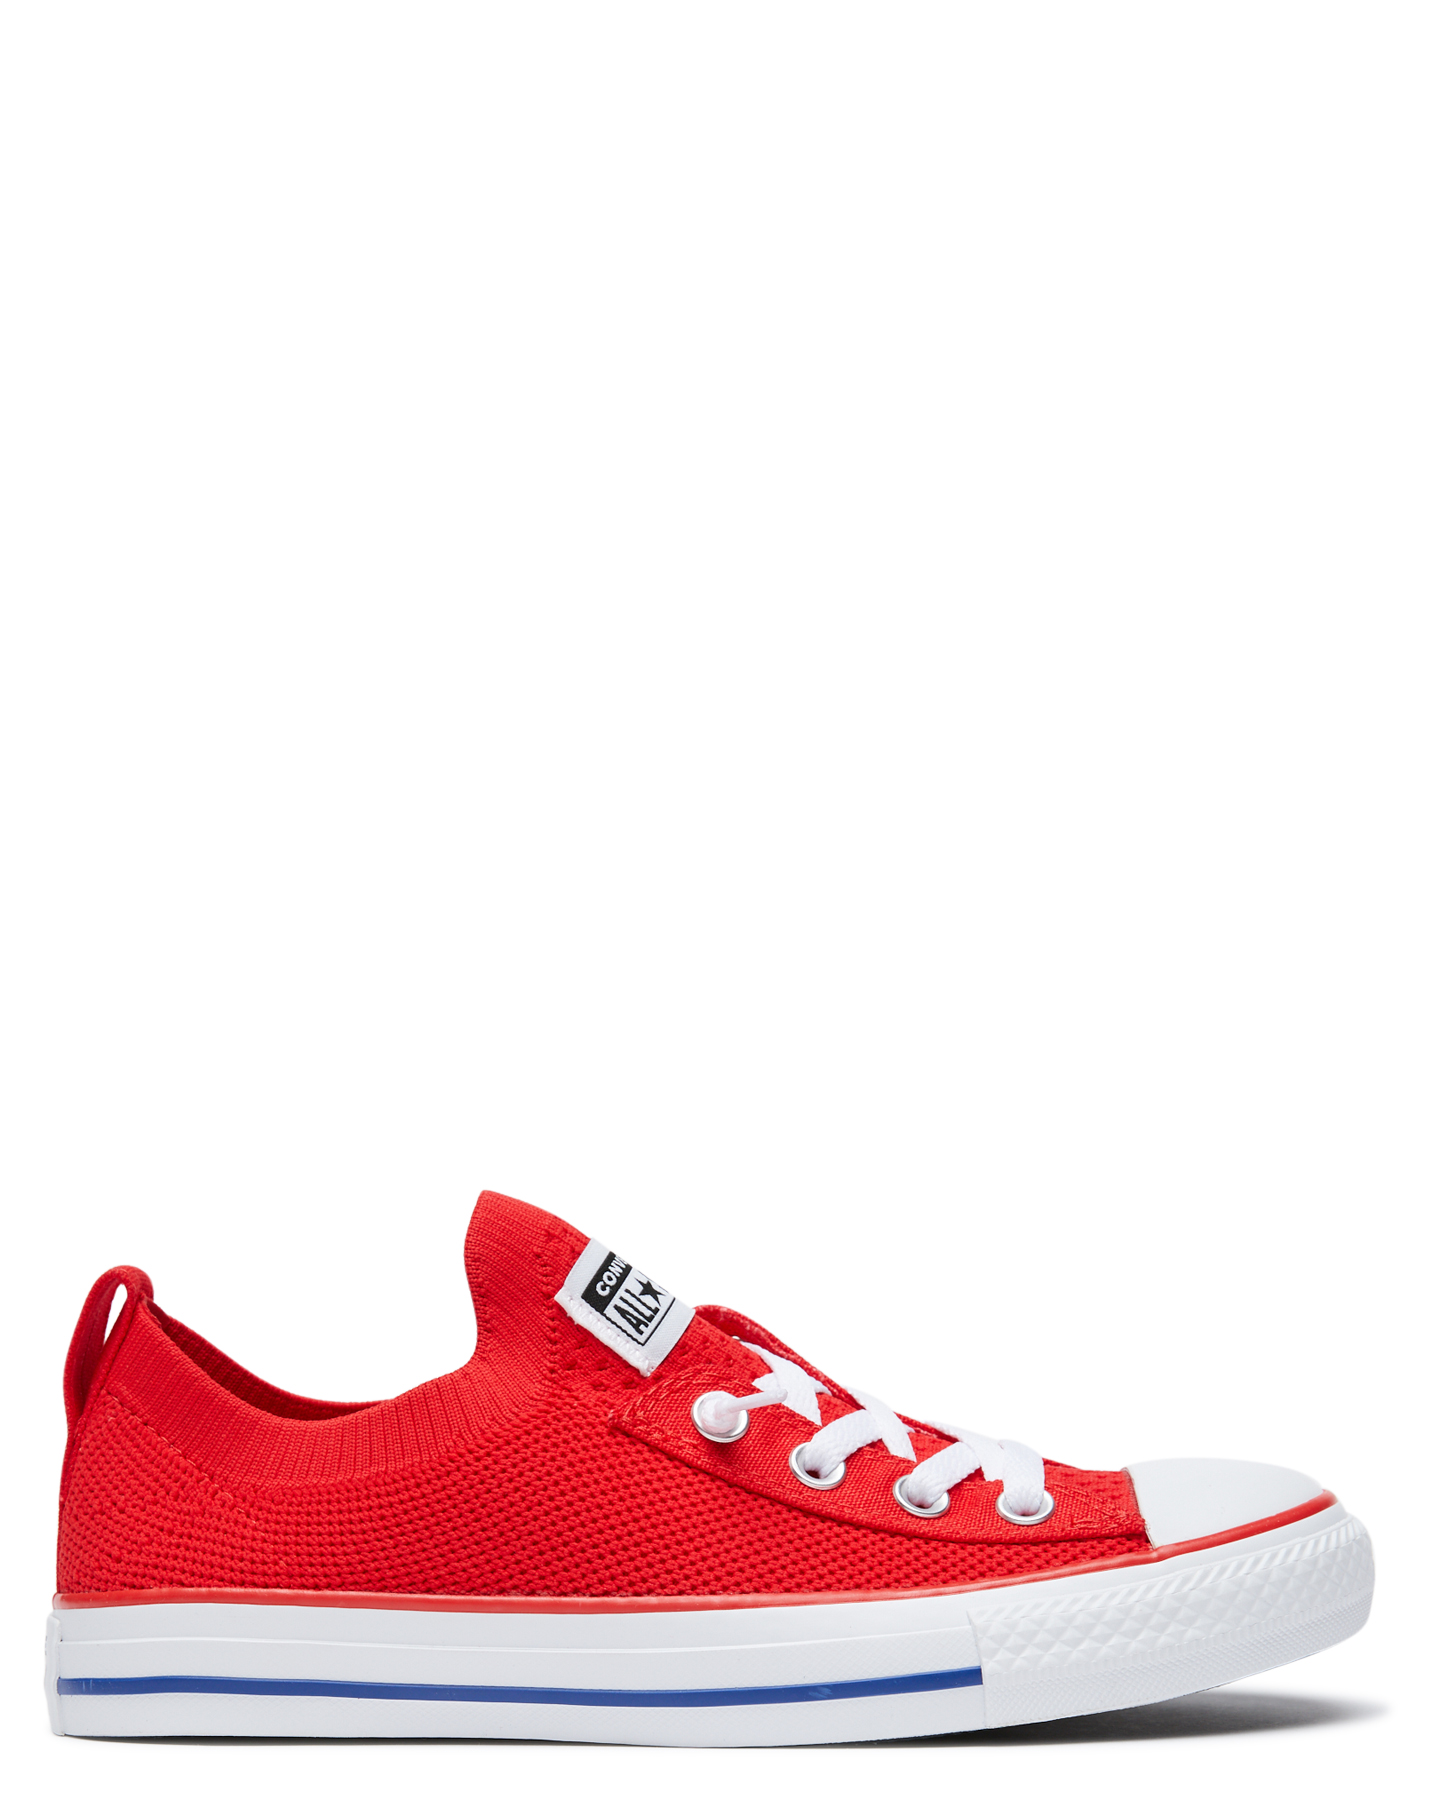 Integrare converse all star womens red 